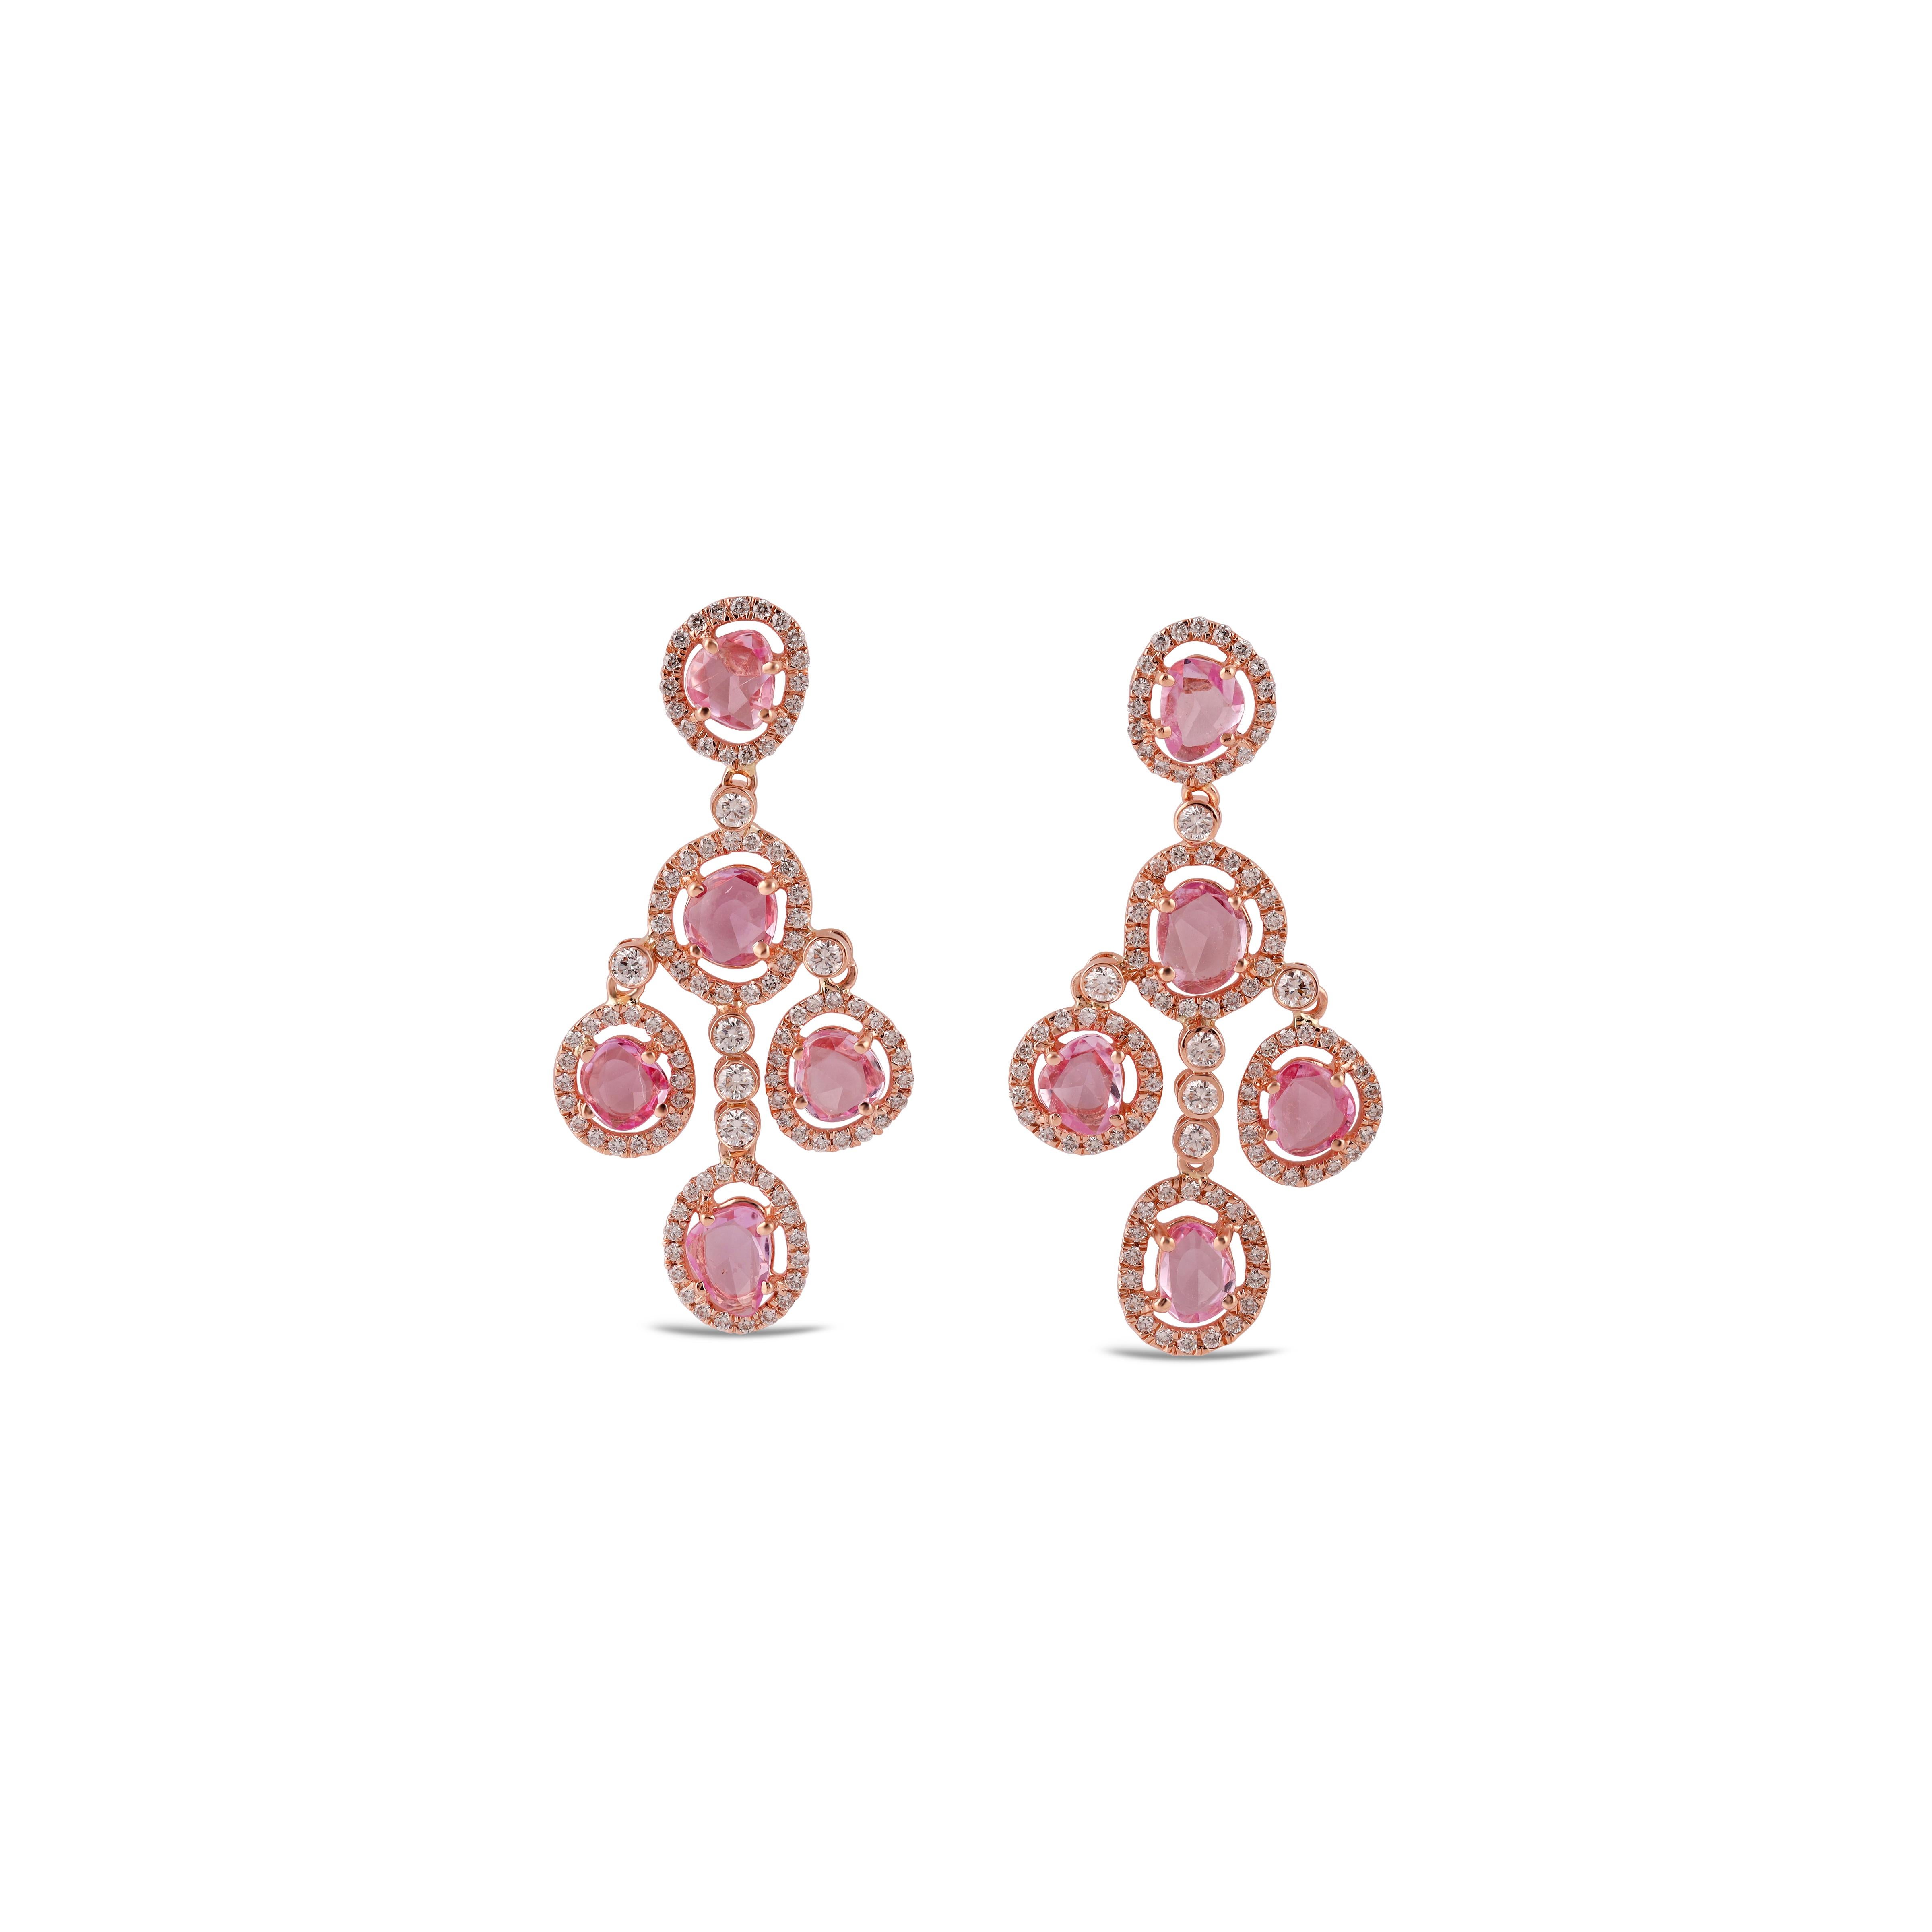 These are an exclusive earrings with sapphire & diamonds features 10 pieces of rose cut sapphires weight 4.23 carats, surrounded with 198 pieces of round brilliant cut diamonds weight 1.37 carats, these entire earrings are studded in 18k rose gold